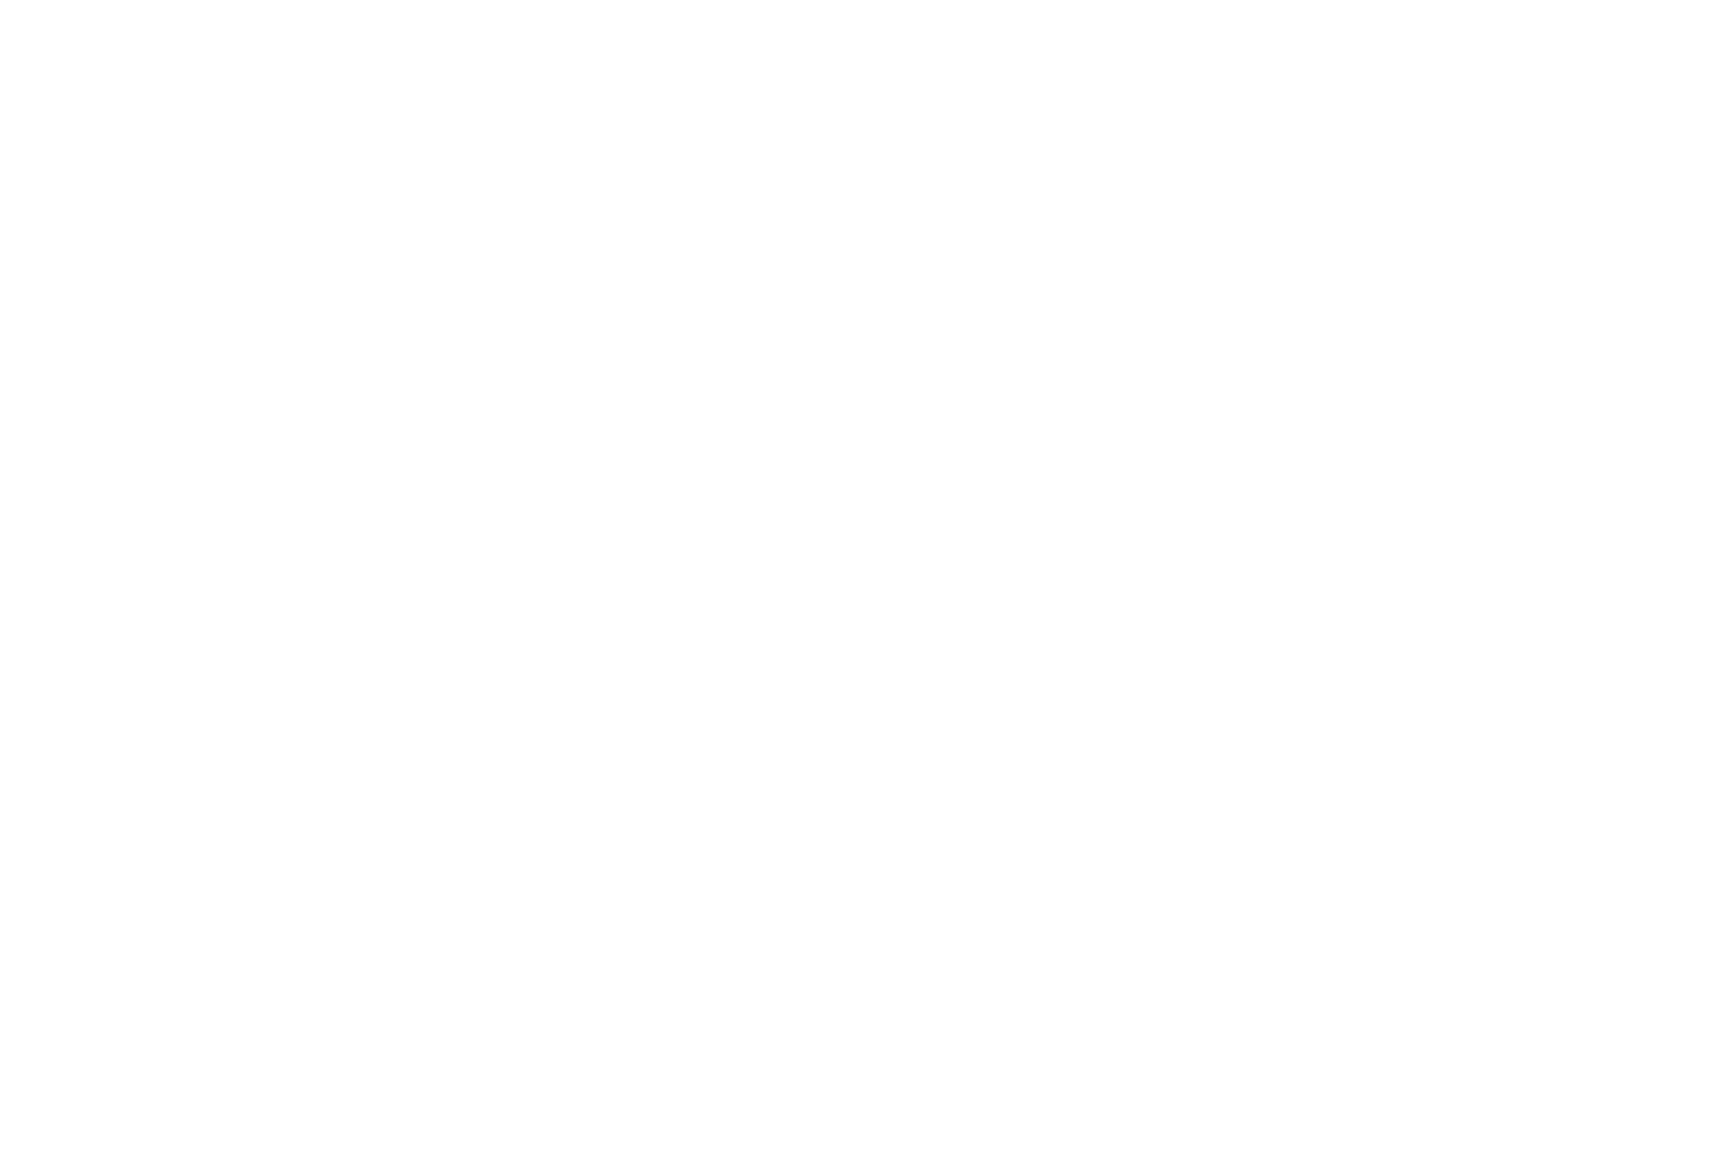 NOMINATED  - BEST ACTOR  - NJ RECOVERY FILM FESTIVAL 2017.png